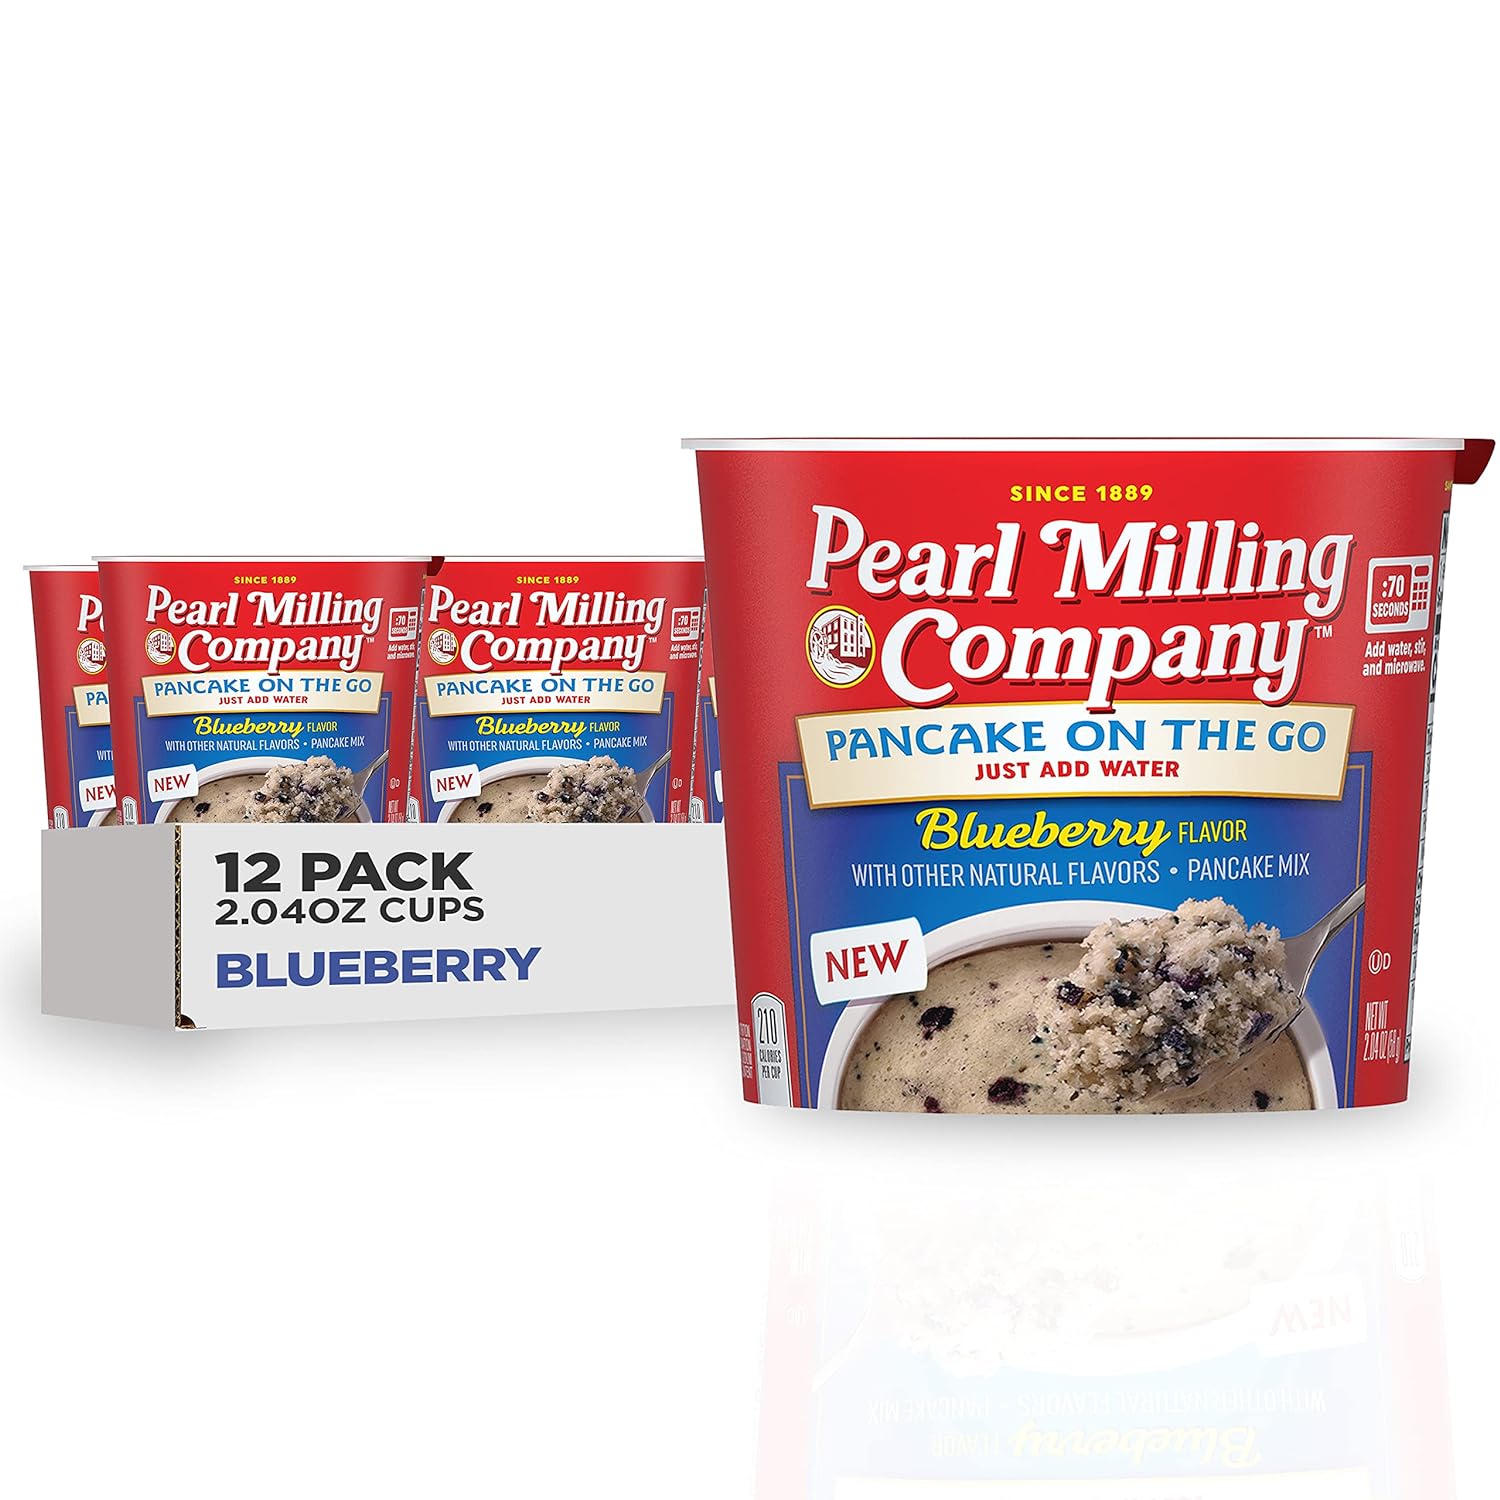 Pearl Milling Company Pancake Cups, Blueberry, 2.11oz Cups (12 Pack)